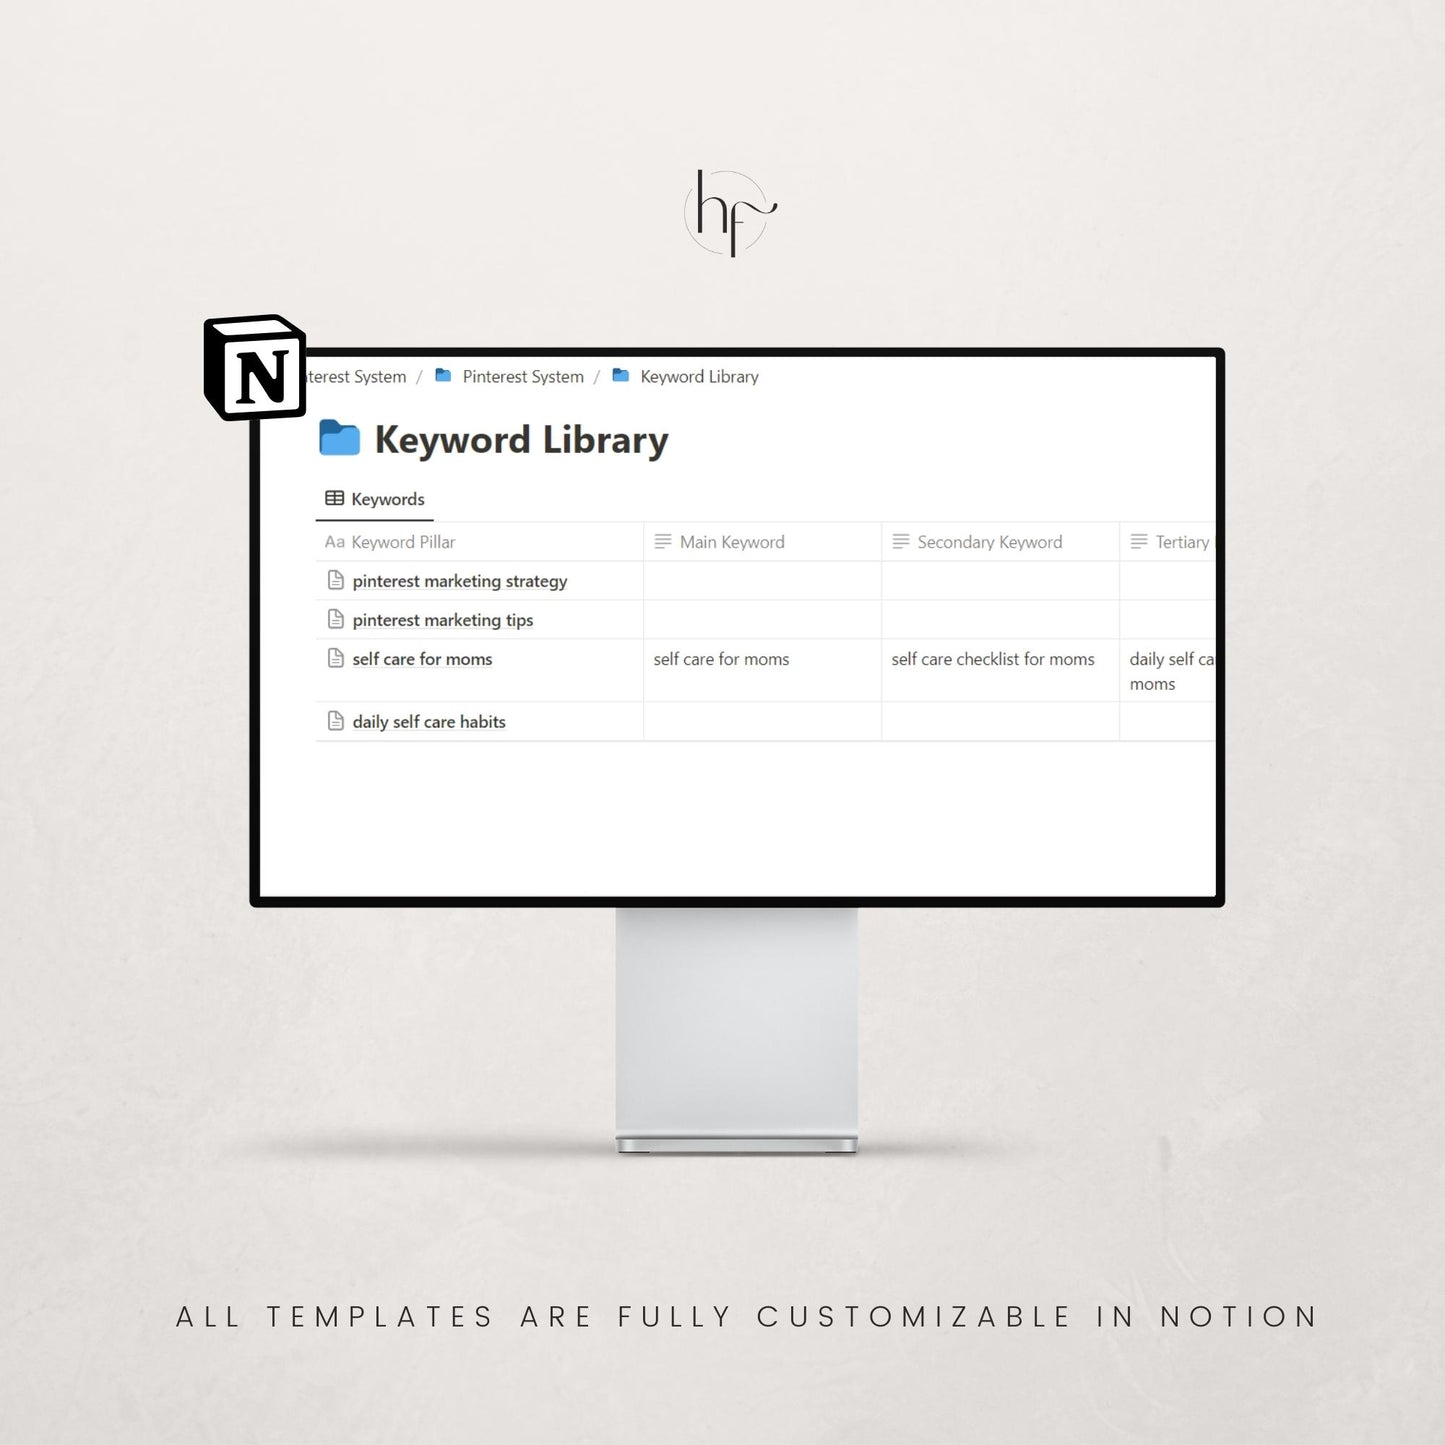 The Pinterest System For Notion